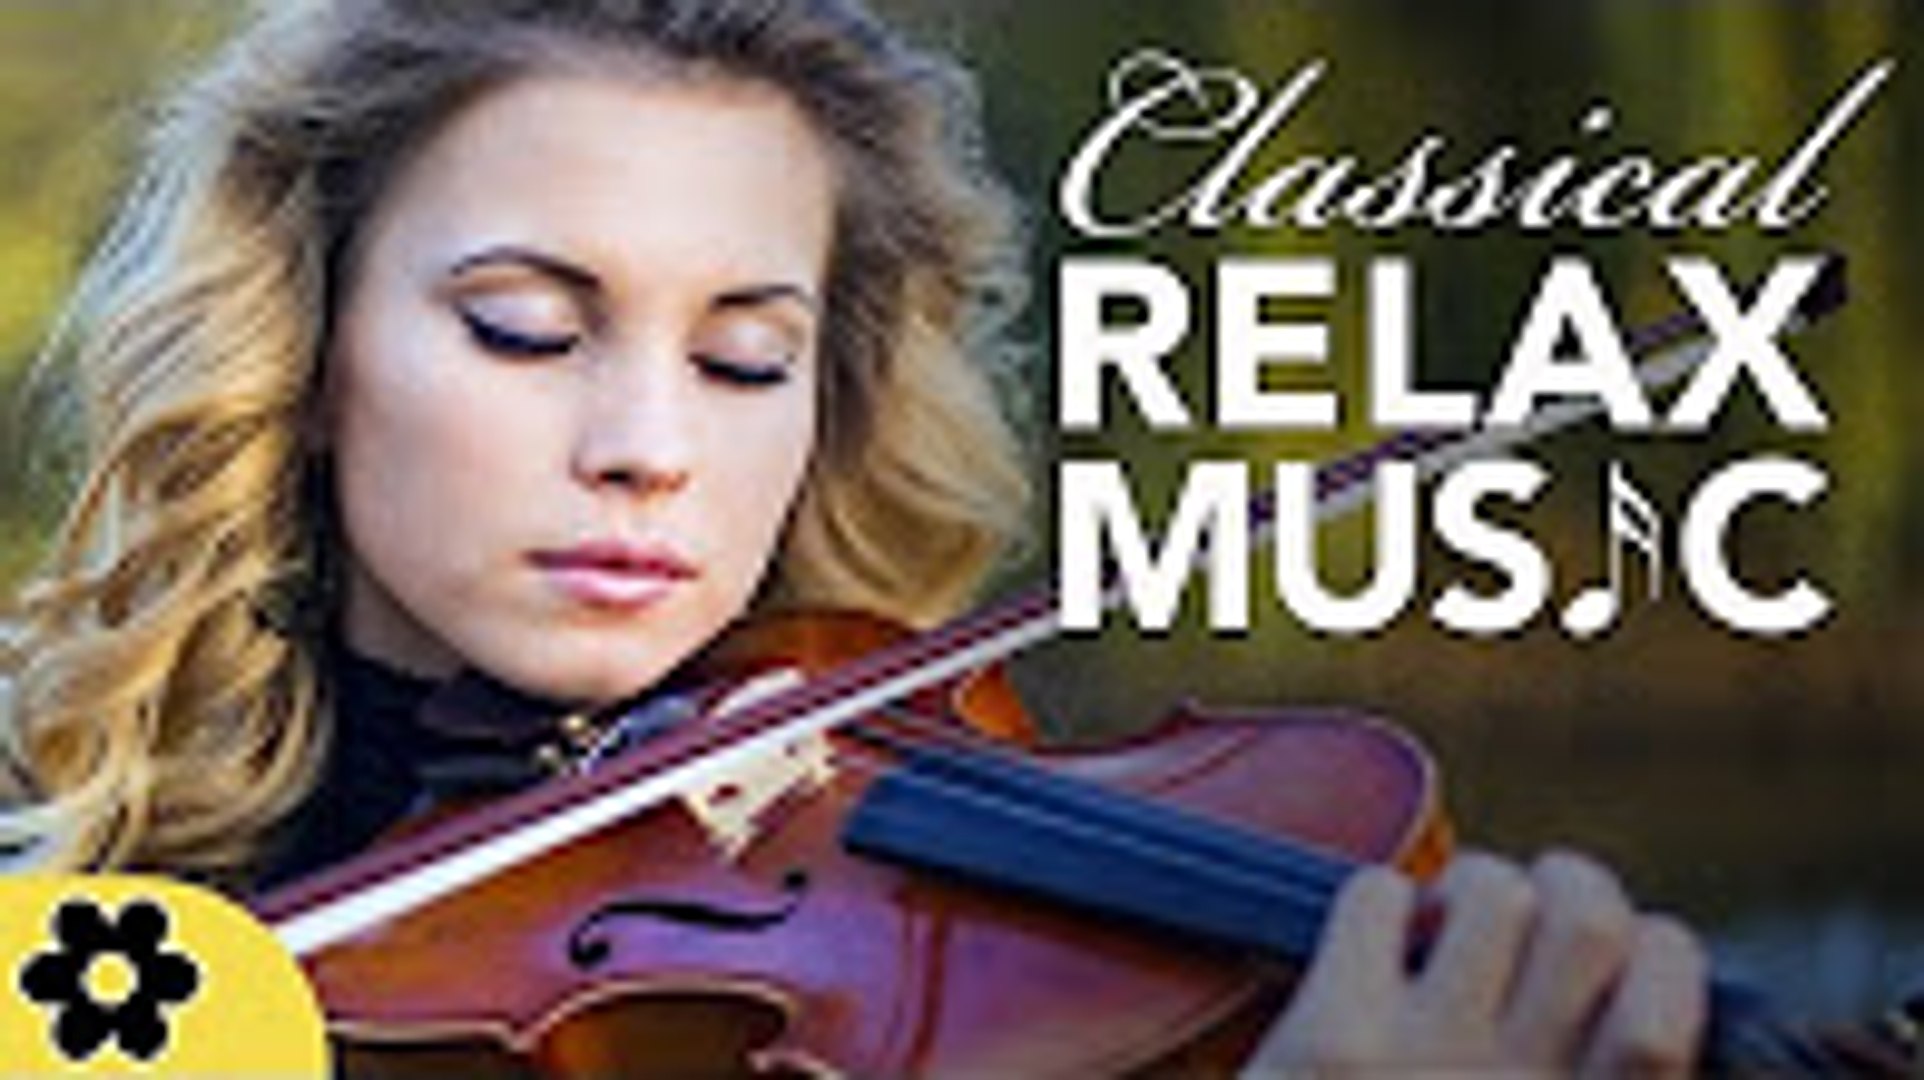 Instrumental Music for Relaxation, Classical Music, Soothing Music, Relax, Background Music, ♫E158D